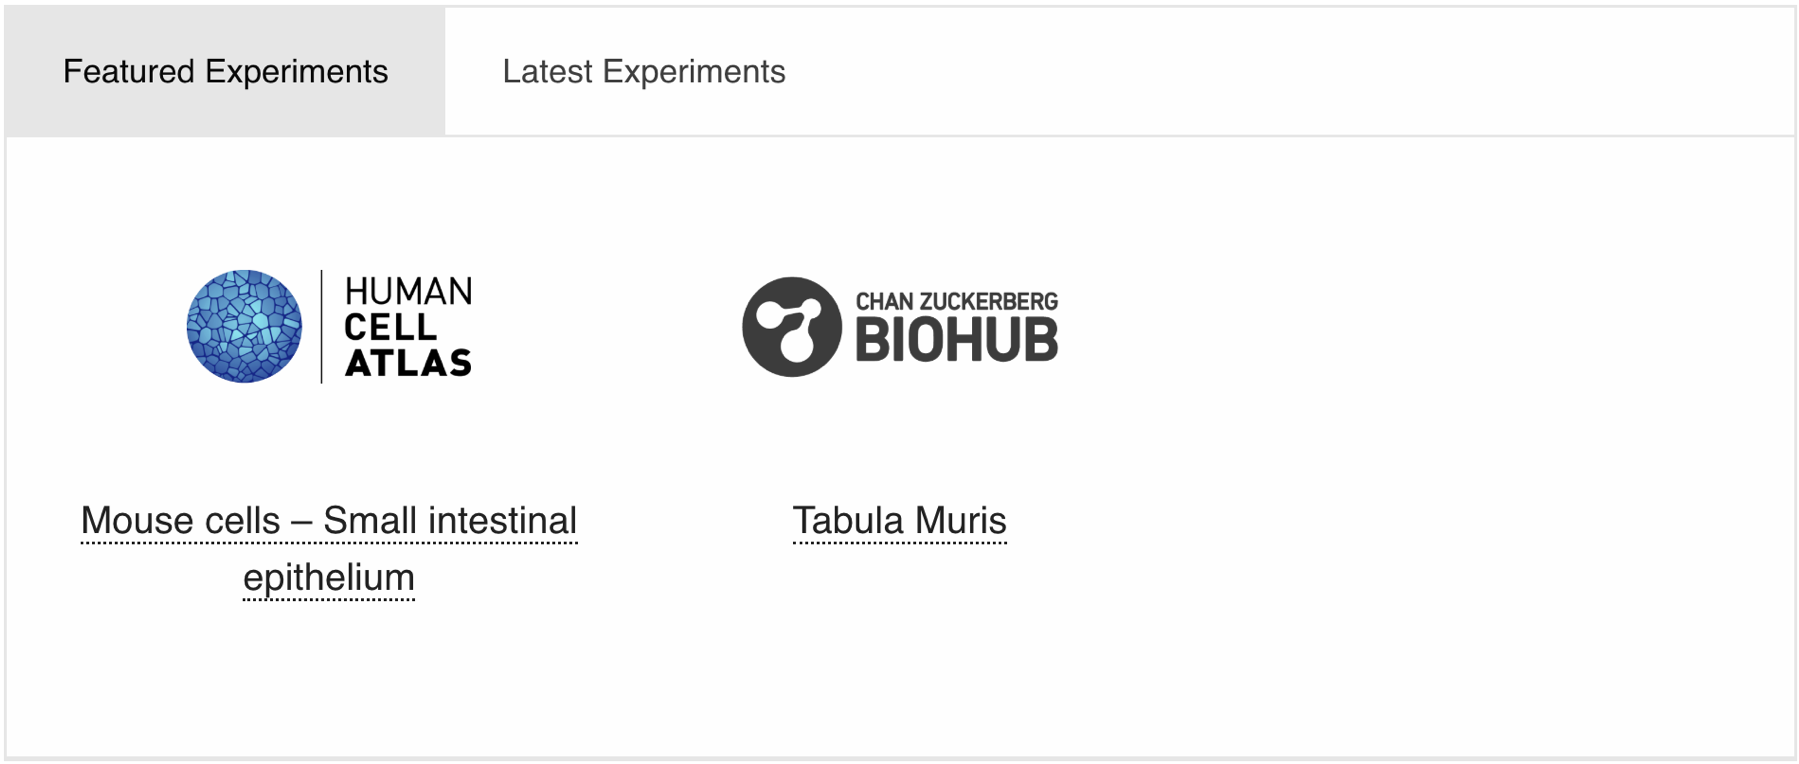 Featured and Latest experiments